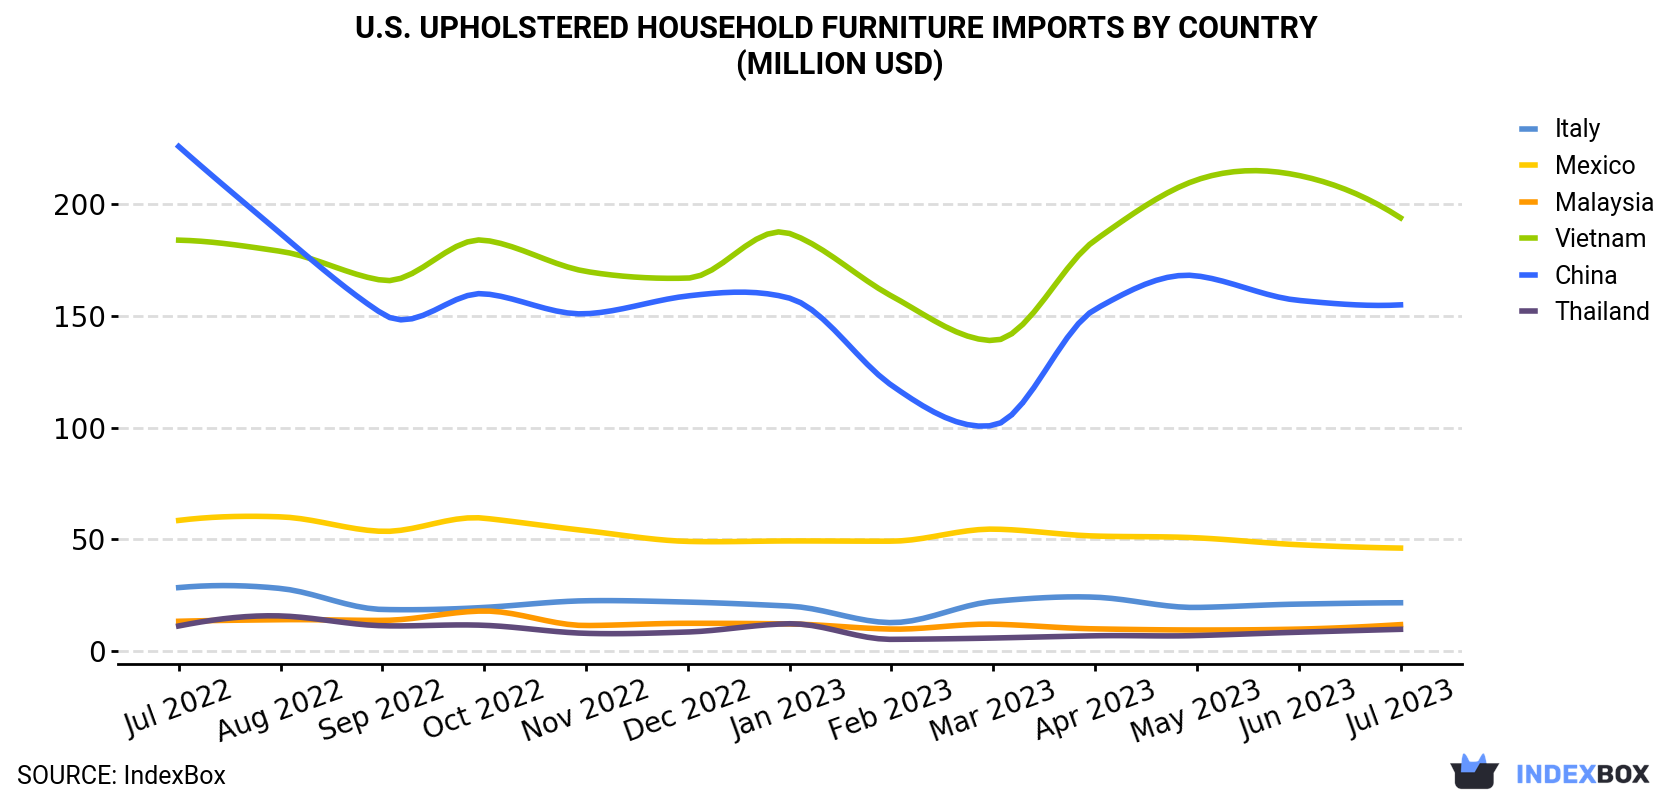 U.S. Upholstered Household Furniture Imports By Country (Million USD)